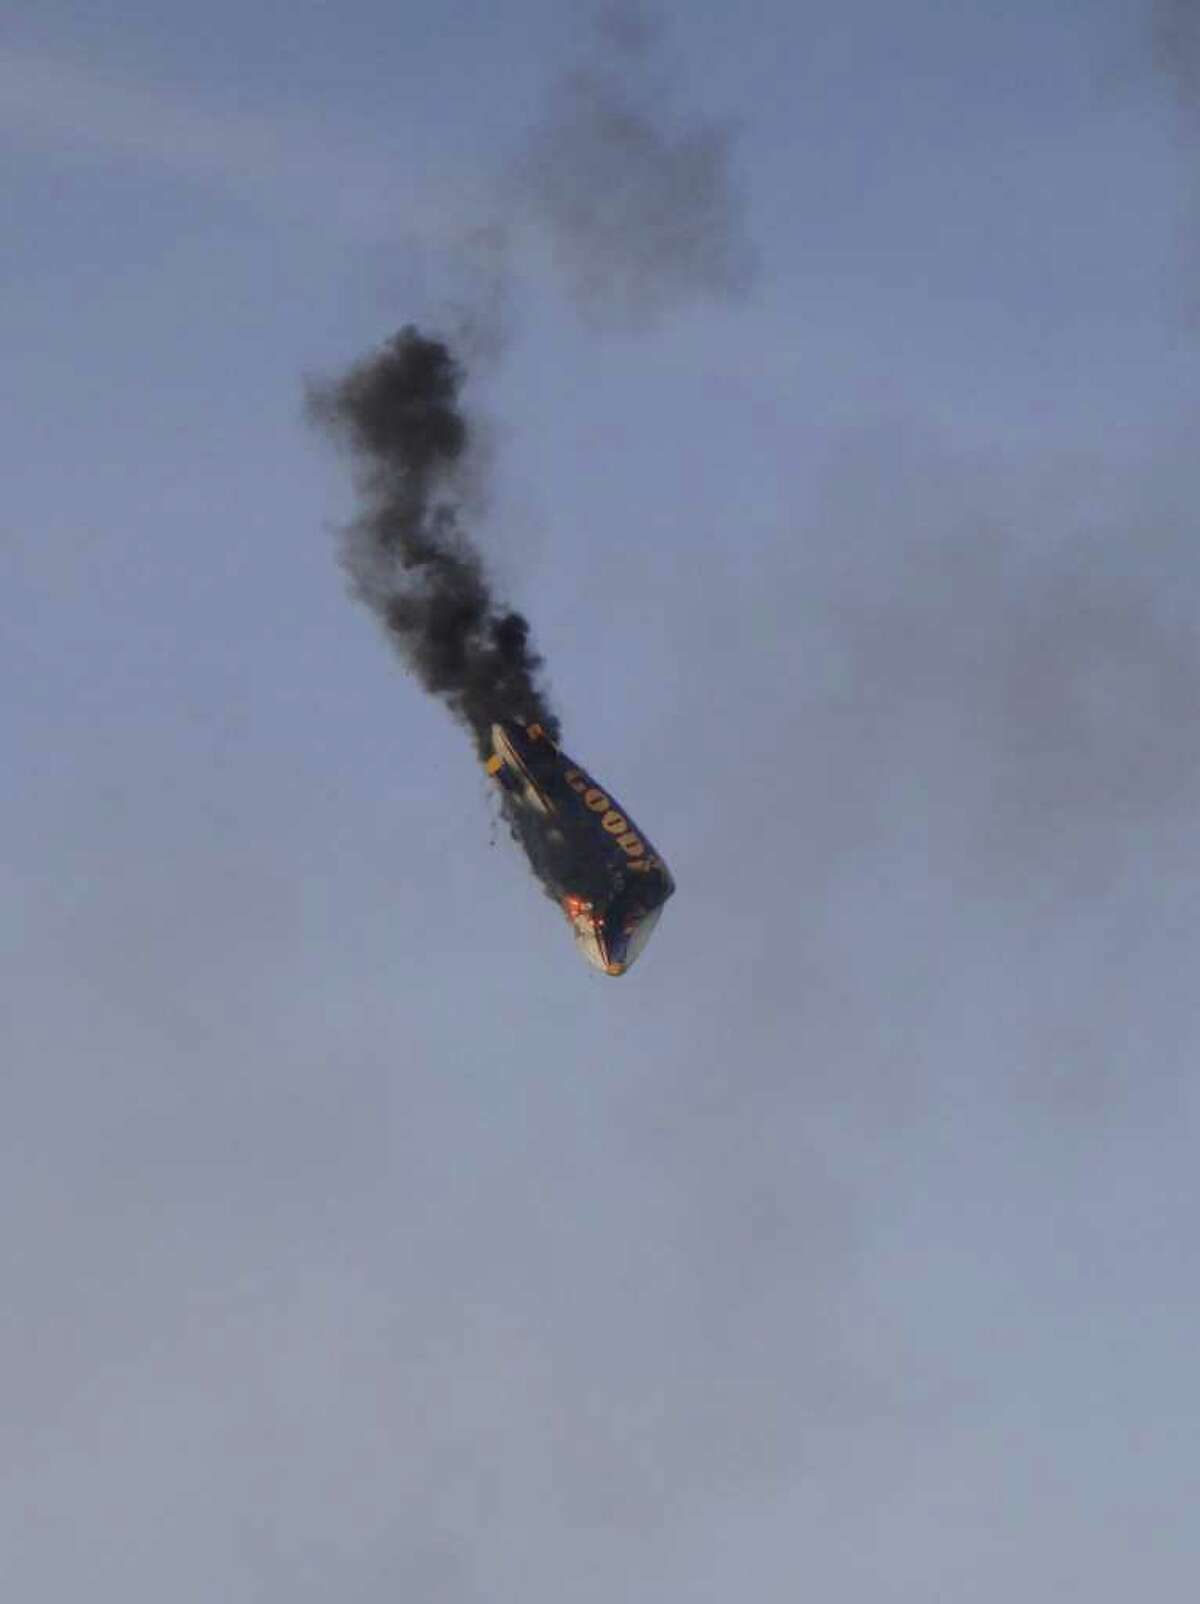  A Goodyear blimp crashes near Oberursel, western Germany, on Sunday. The pilot of the blimp was killed and three passengers had to leap to safety when the aircraft caught fire and crashed, a police spokesman said. The blimp had been making a promotional flight to mark a local festival.